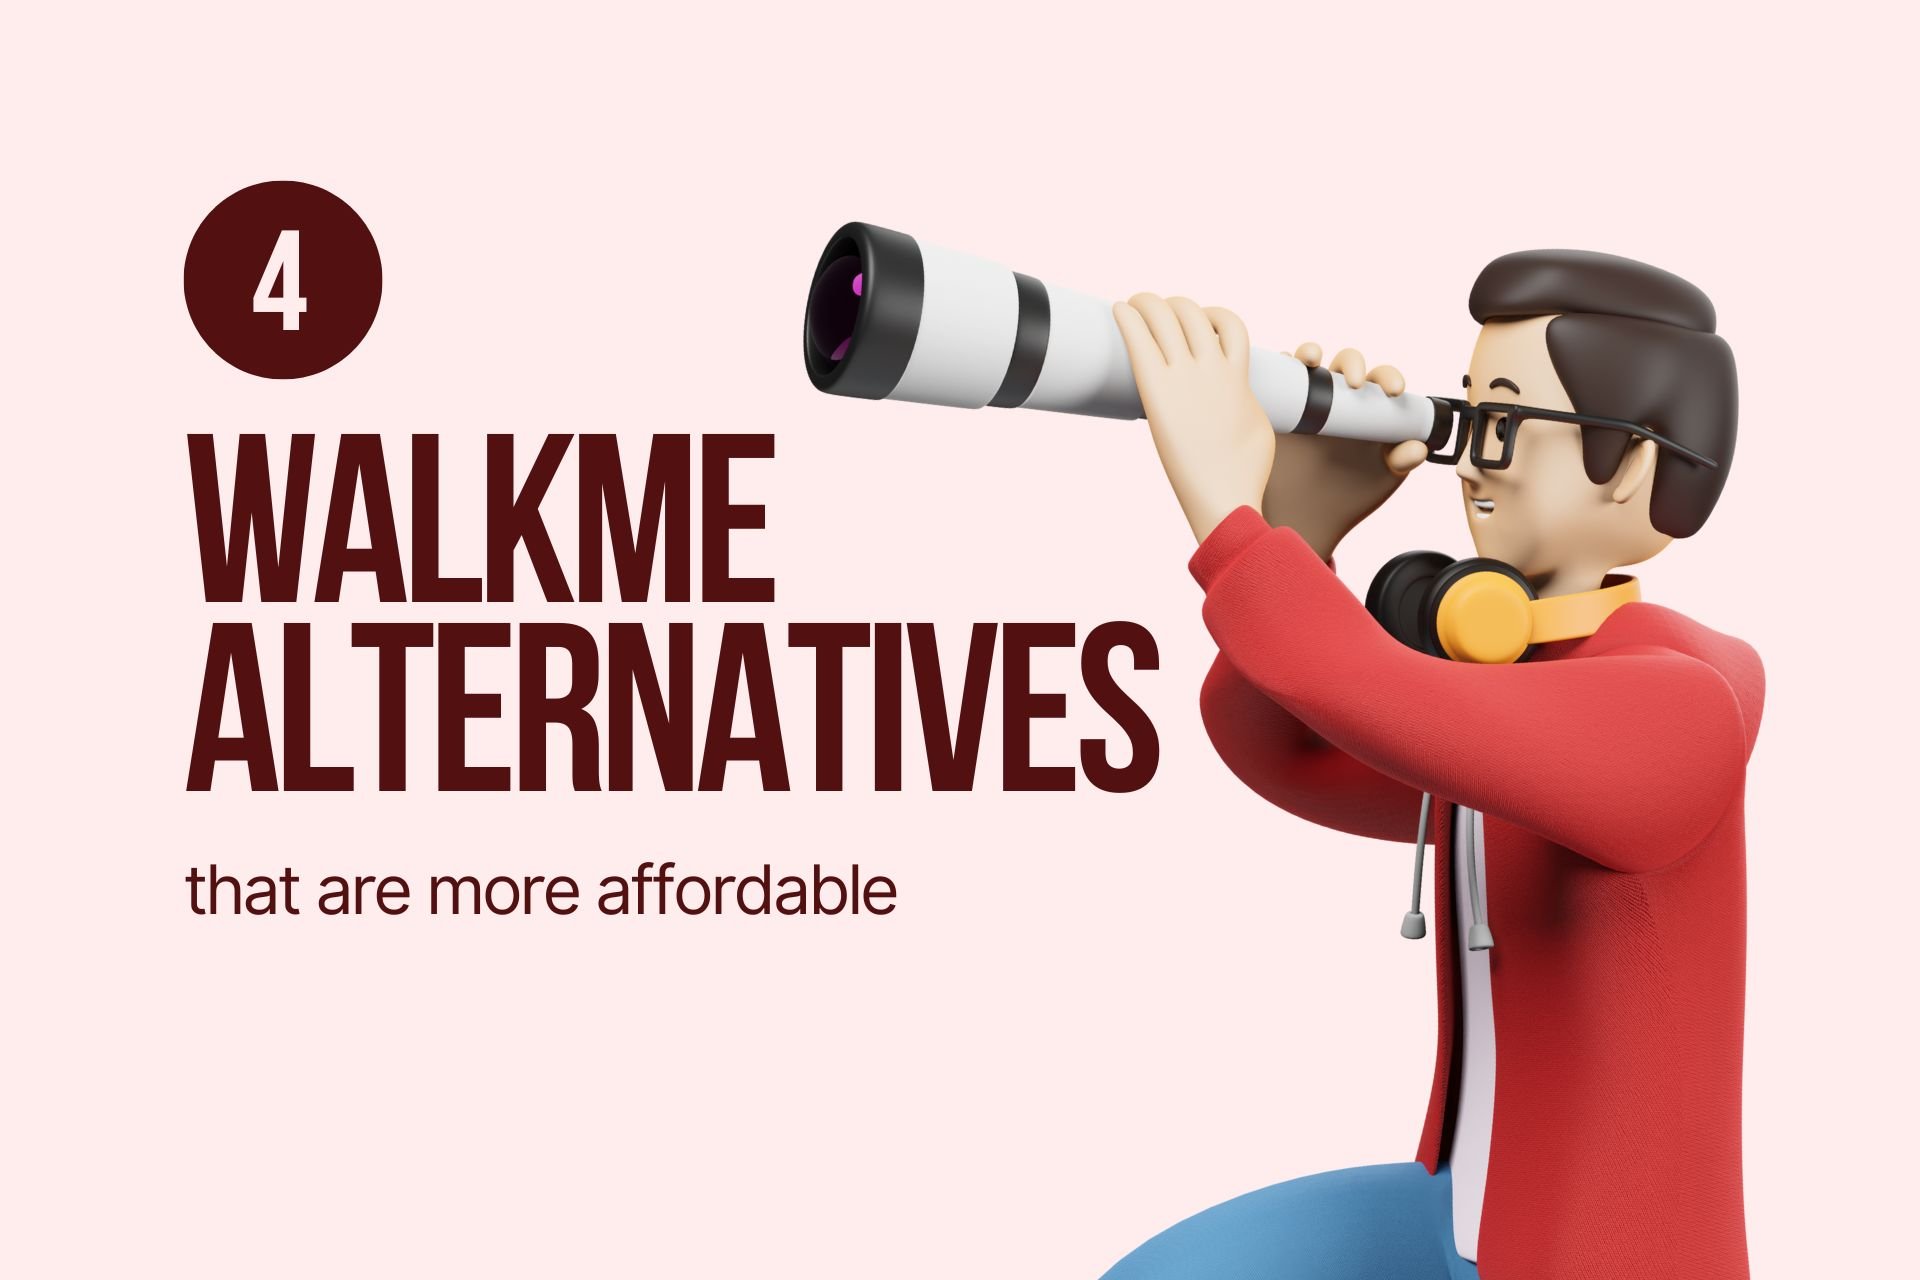 4 WalkMe Alternatives That are More Affordable